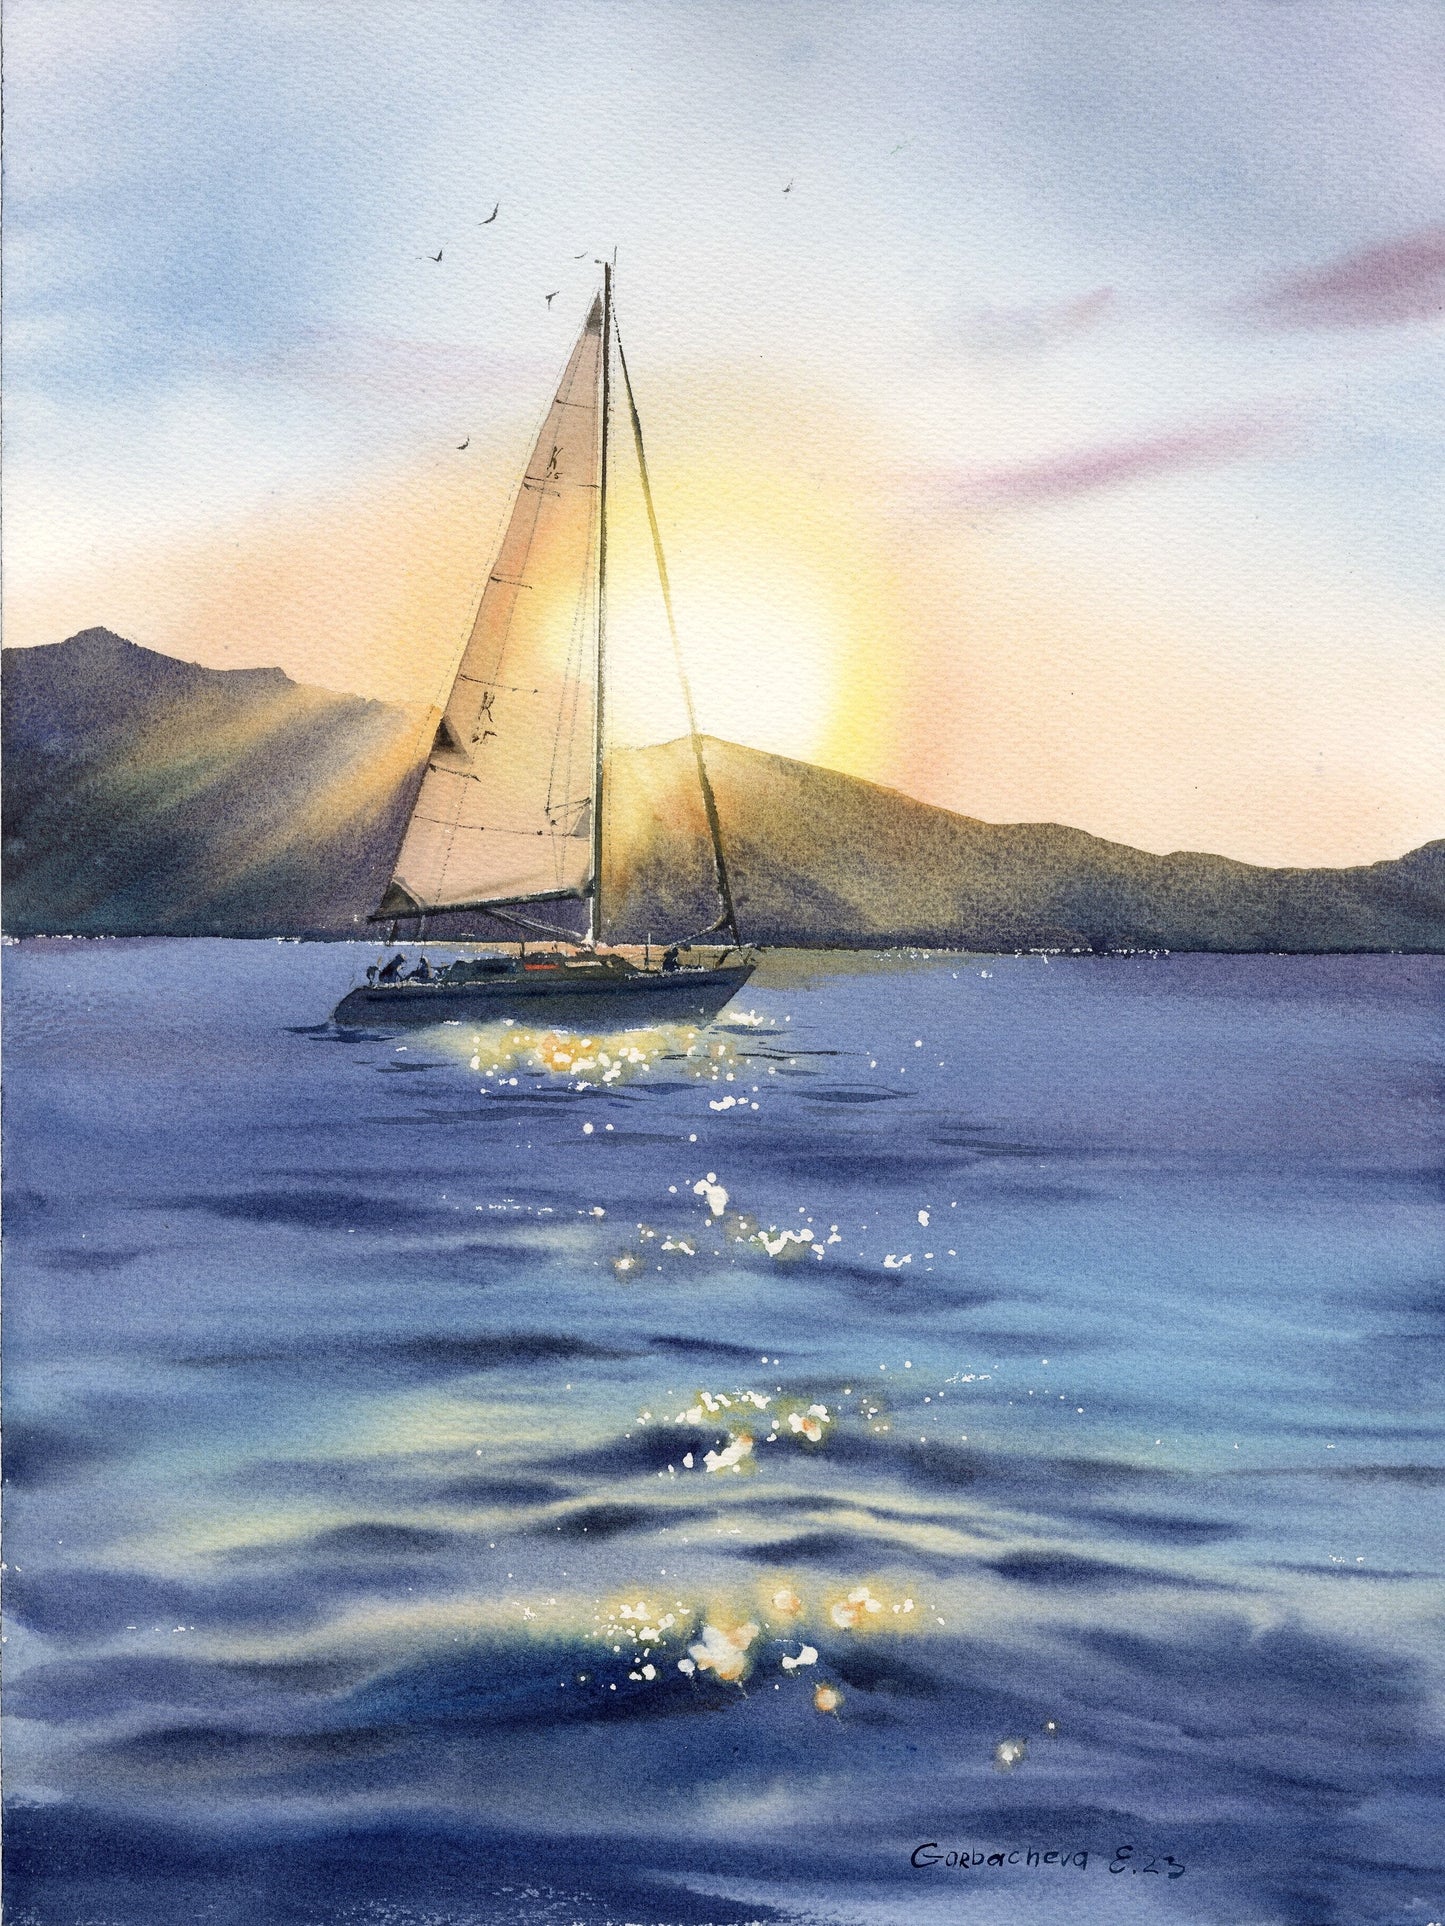 Sailing Painting Original Watercolour, Seascape Artwork - Yacht in the sun #2 - 12x16 inch